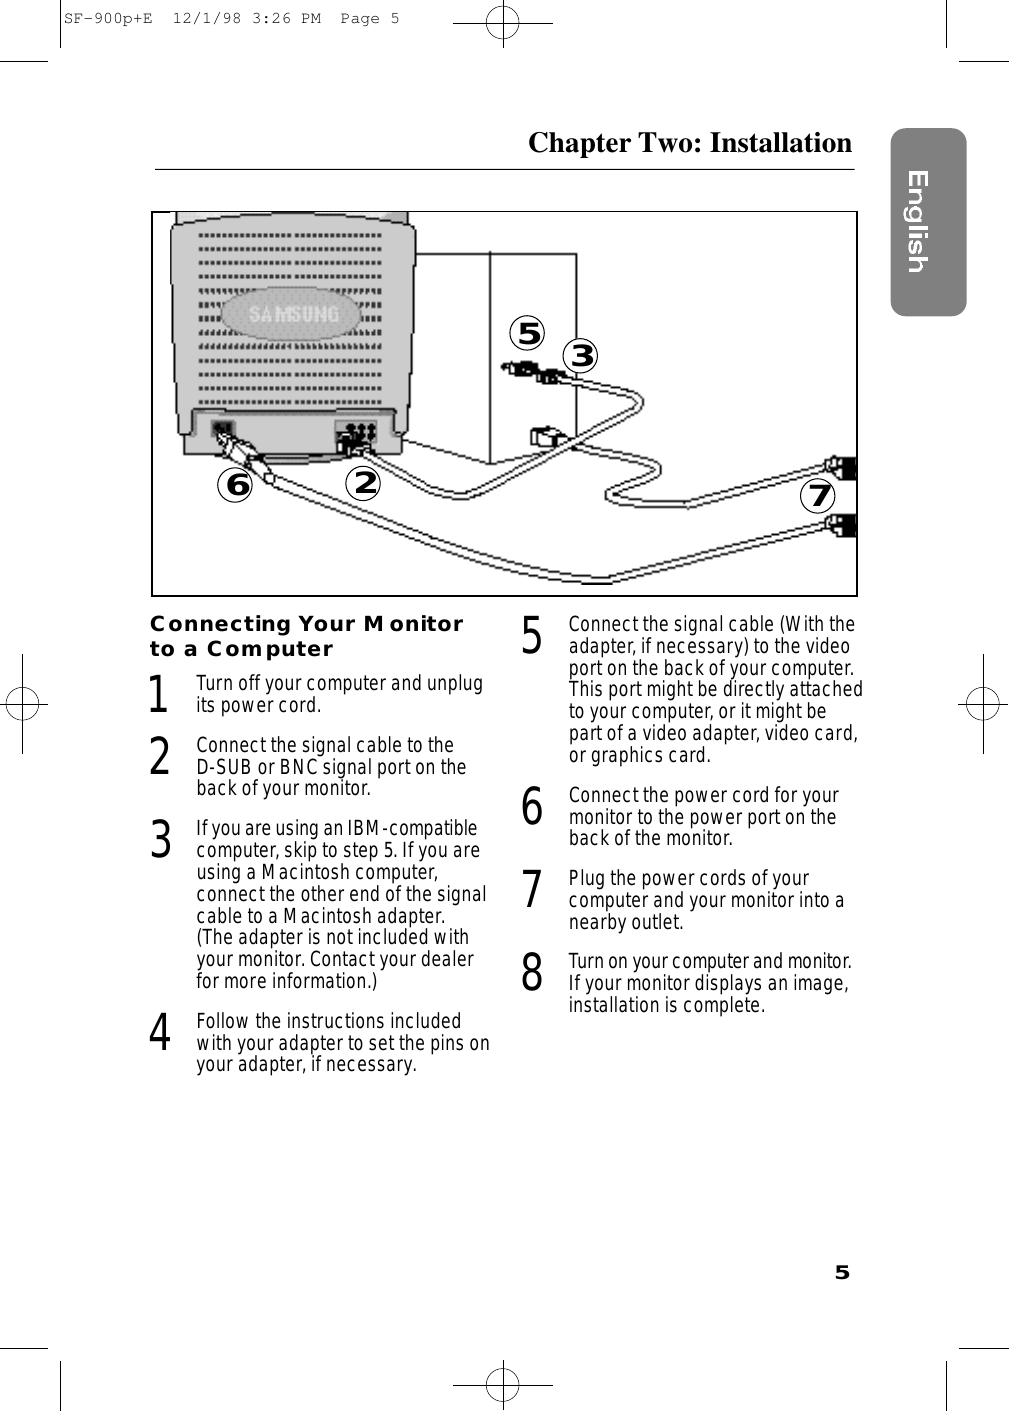 5Chapter Two: InstallationConnecting Your Monitorto a Computer1Turn off your computer and unplugits power cord.2Connect the signal cable to the D-SUB or BNC signal port on theback of your monitor.3If you are using an IBM-compatiblecomputer, skip to step 5. If you areusing a Macintosh computer, connect the other end of the signalcable to a Macintosh adapter. (The adapter is not included withyour monitor. Contact your dealerfor more information.) 4Follow the instructions includedwith your adapter to set the pins onyour adapter, if necessary.5Connect the signal cable (With theadapter, if necessary) to the videoport on the back of your computer.This port might be directly attachedto your computer, or it might bepart of a video adapter, video card,or graphics card.6Connect the power cord for yourmonitor to the power port on theback of the monitor.7Plug the power cords of your computer and your monitor into anearby outlet.8Tu rn on your computer and monitor.If your monitor displays an image,installation is complete.26735SF-900p+E  12/1/98 3:26 PM  Page 5